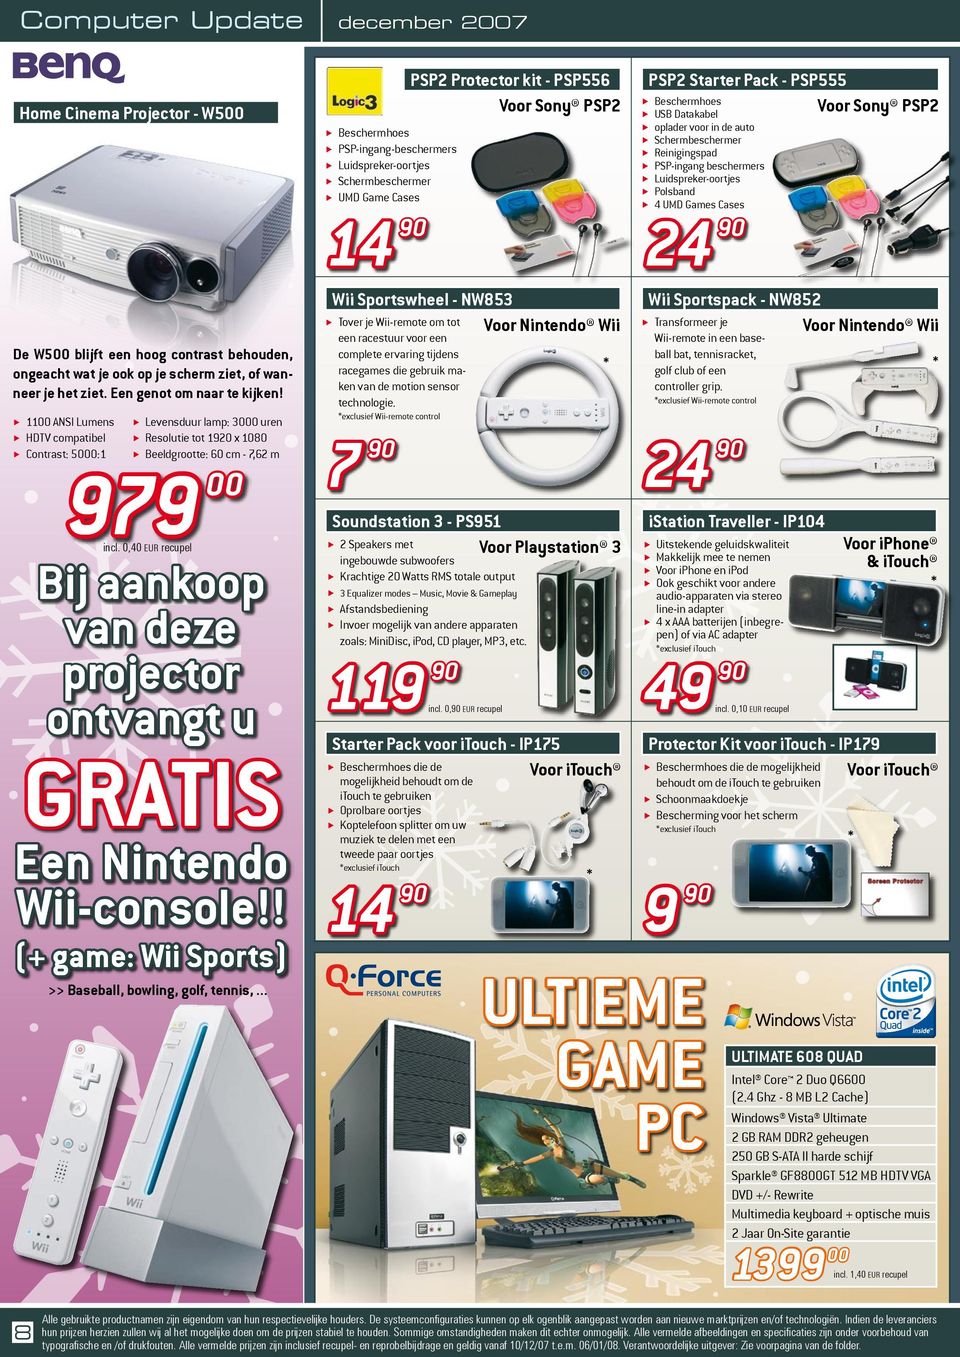 Wii-console!! (+ game: Wii Sports) >> Baseball, bowling, golf, tennis,.